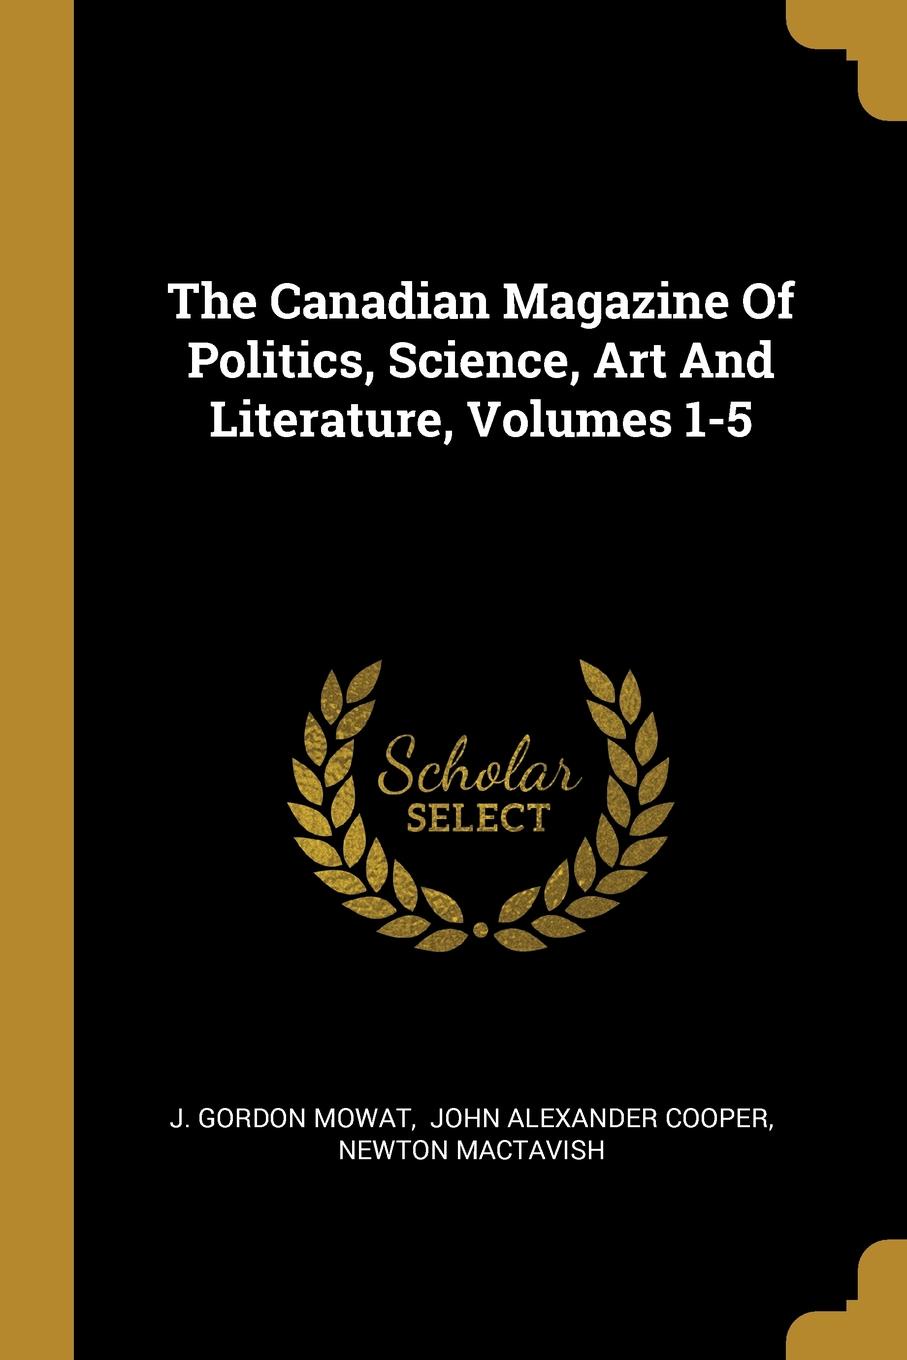 The Canadian Magazine Of Politics, Science, Art And Literature, Volumes 1-5